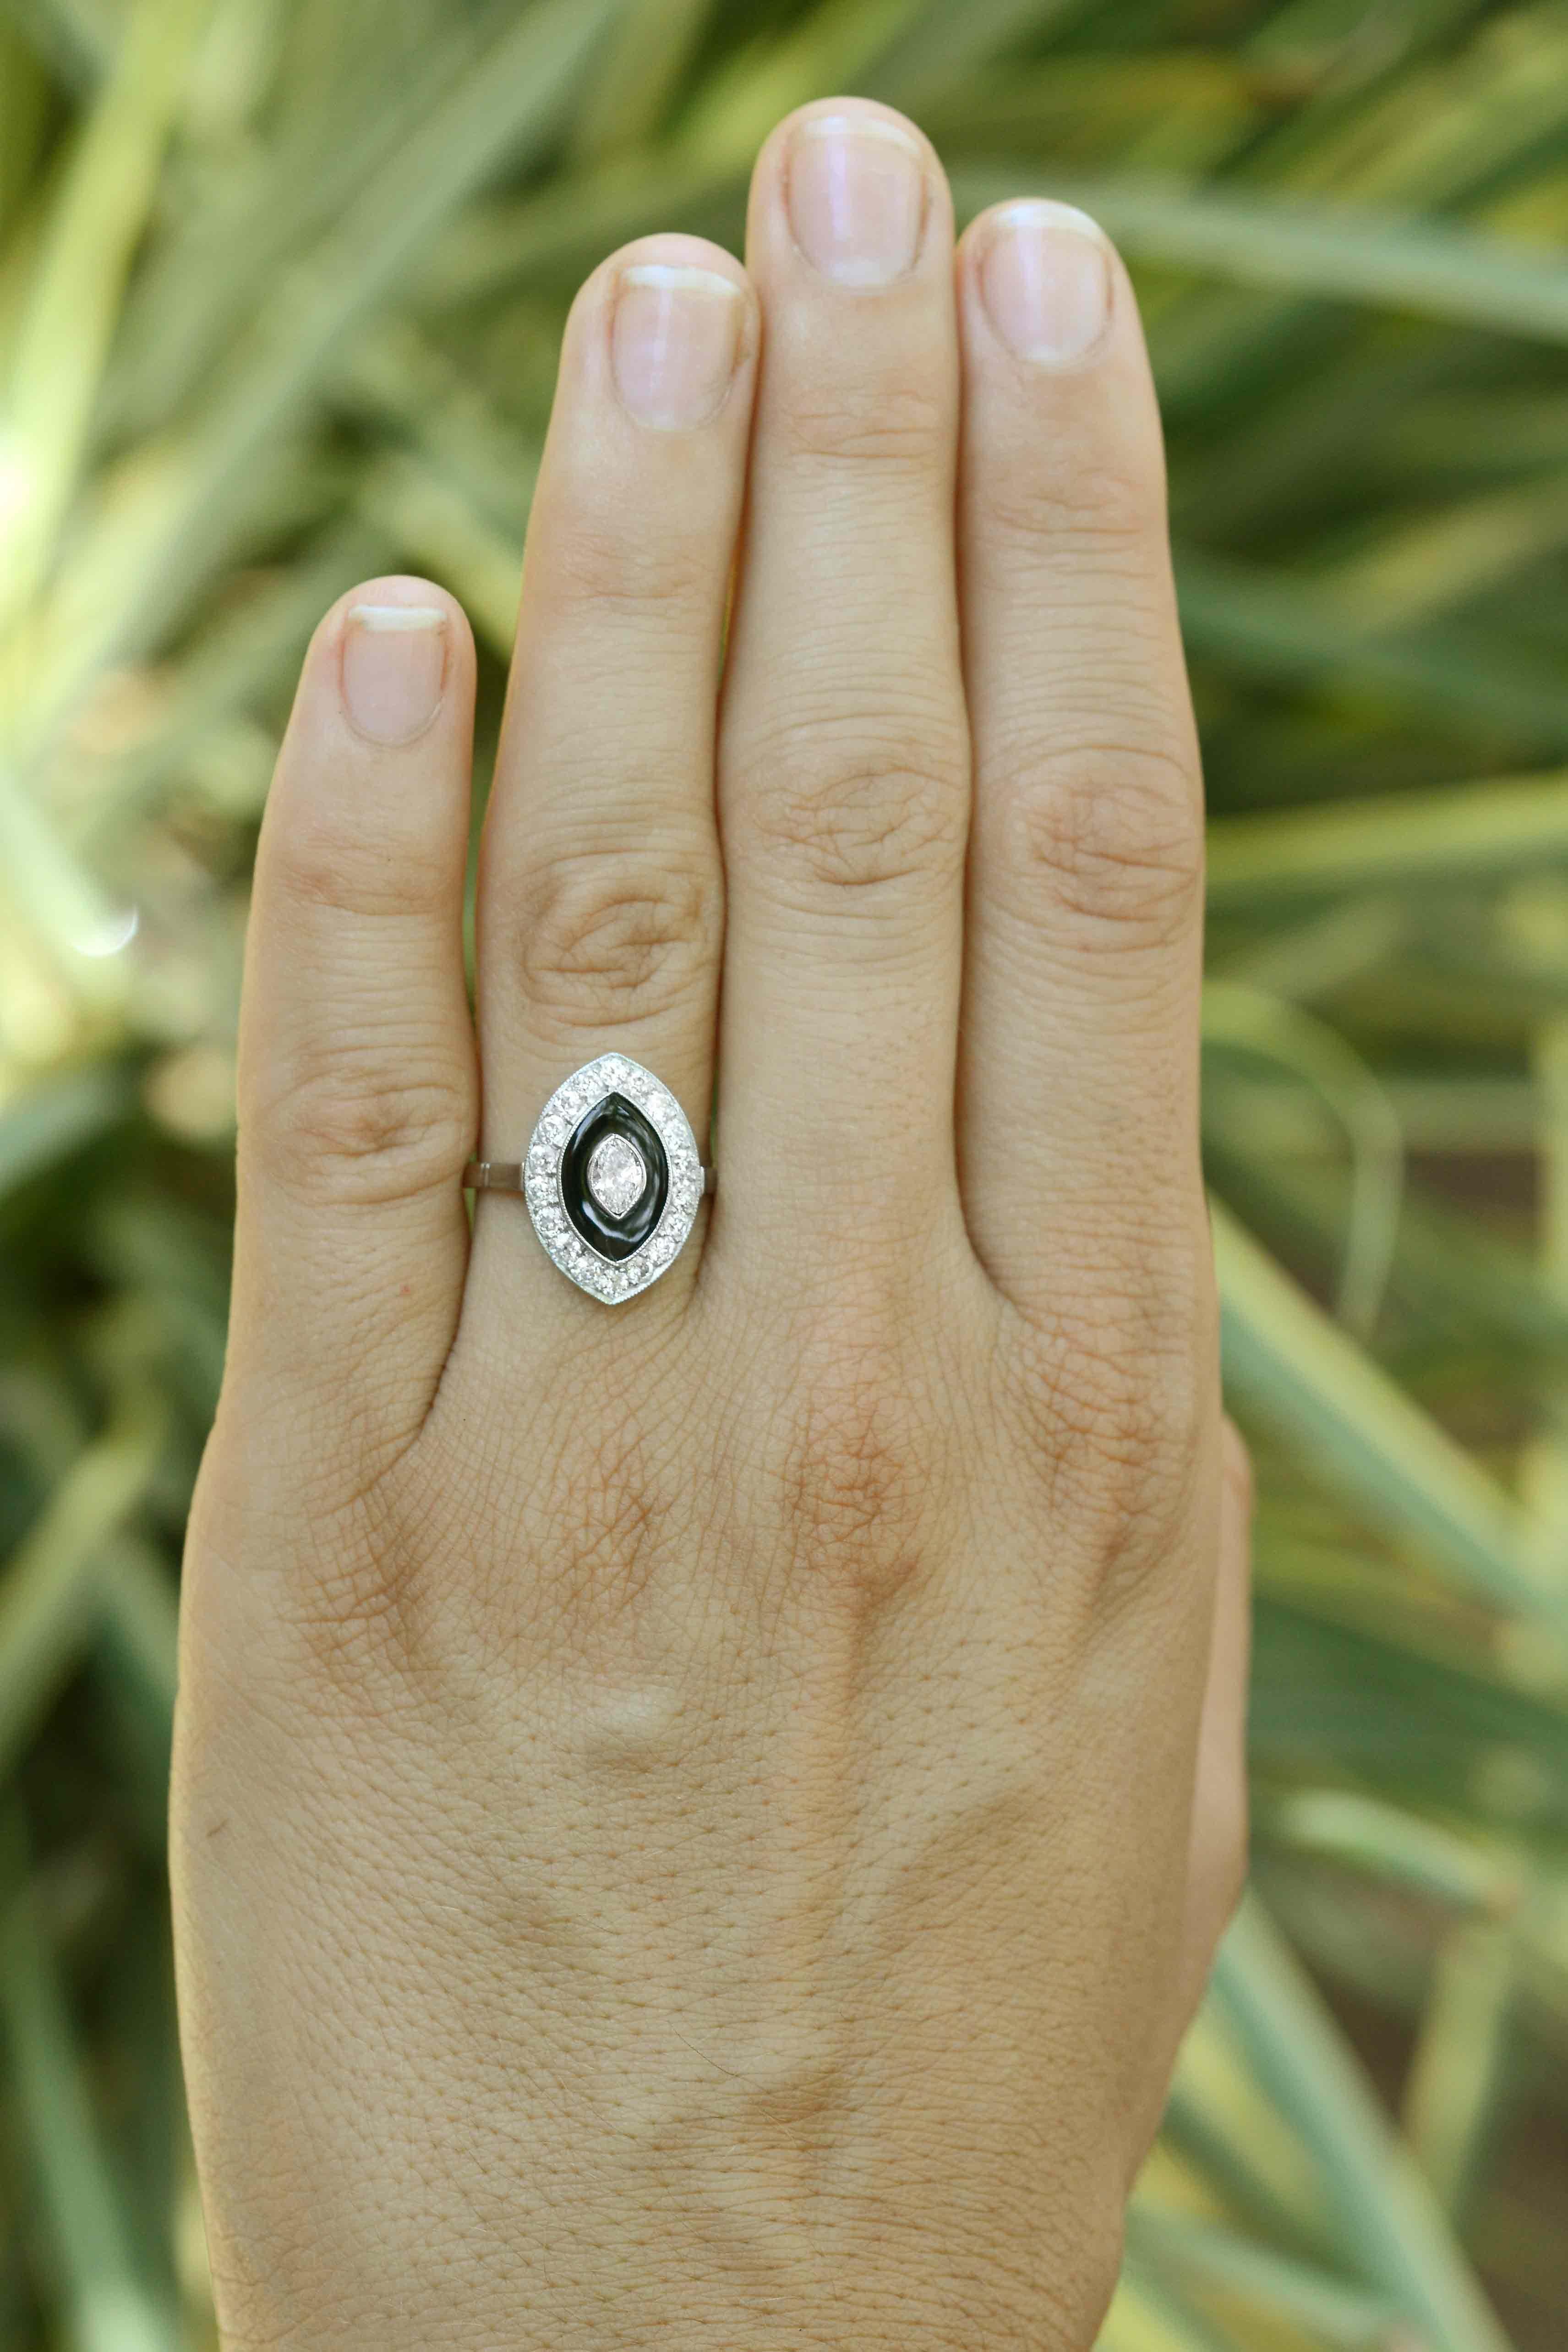 The Carlisle Hall Art Deco marquise diamond black onyx engagement ring is a sleek, Jazz Age cocktail ring with an evil eye motif. Centered by a sizzling, sparkling  center diamond cradled by a glistening black onyx and milgrain platinum halo and